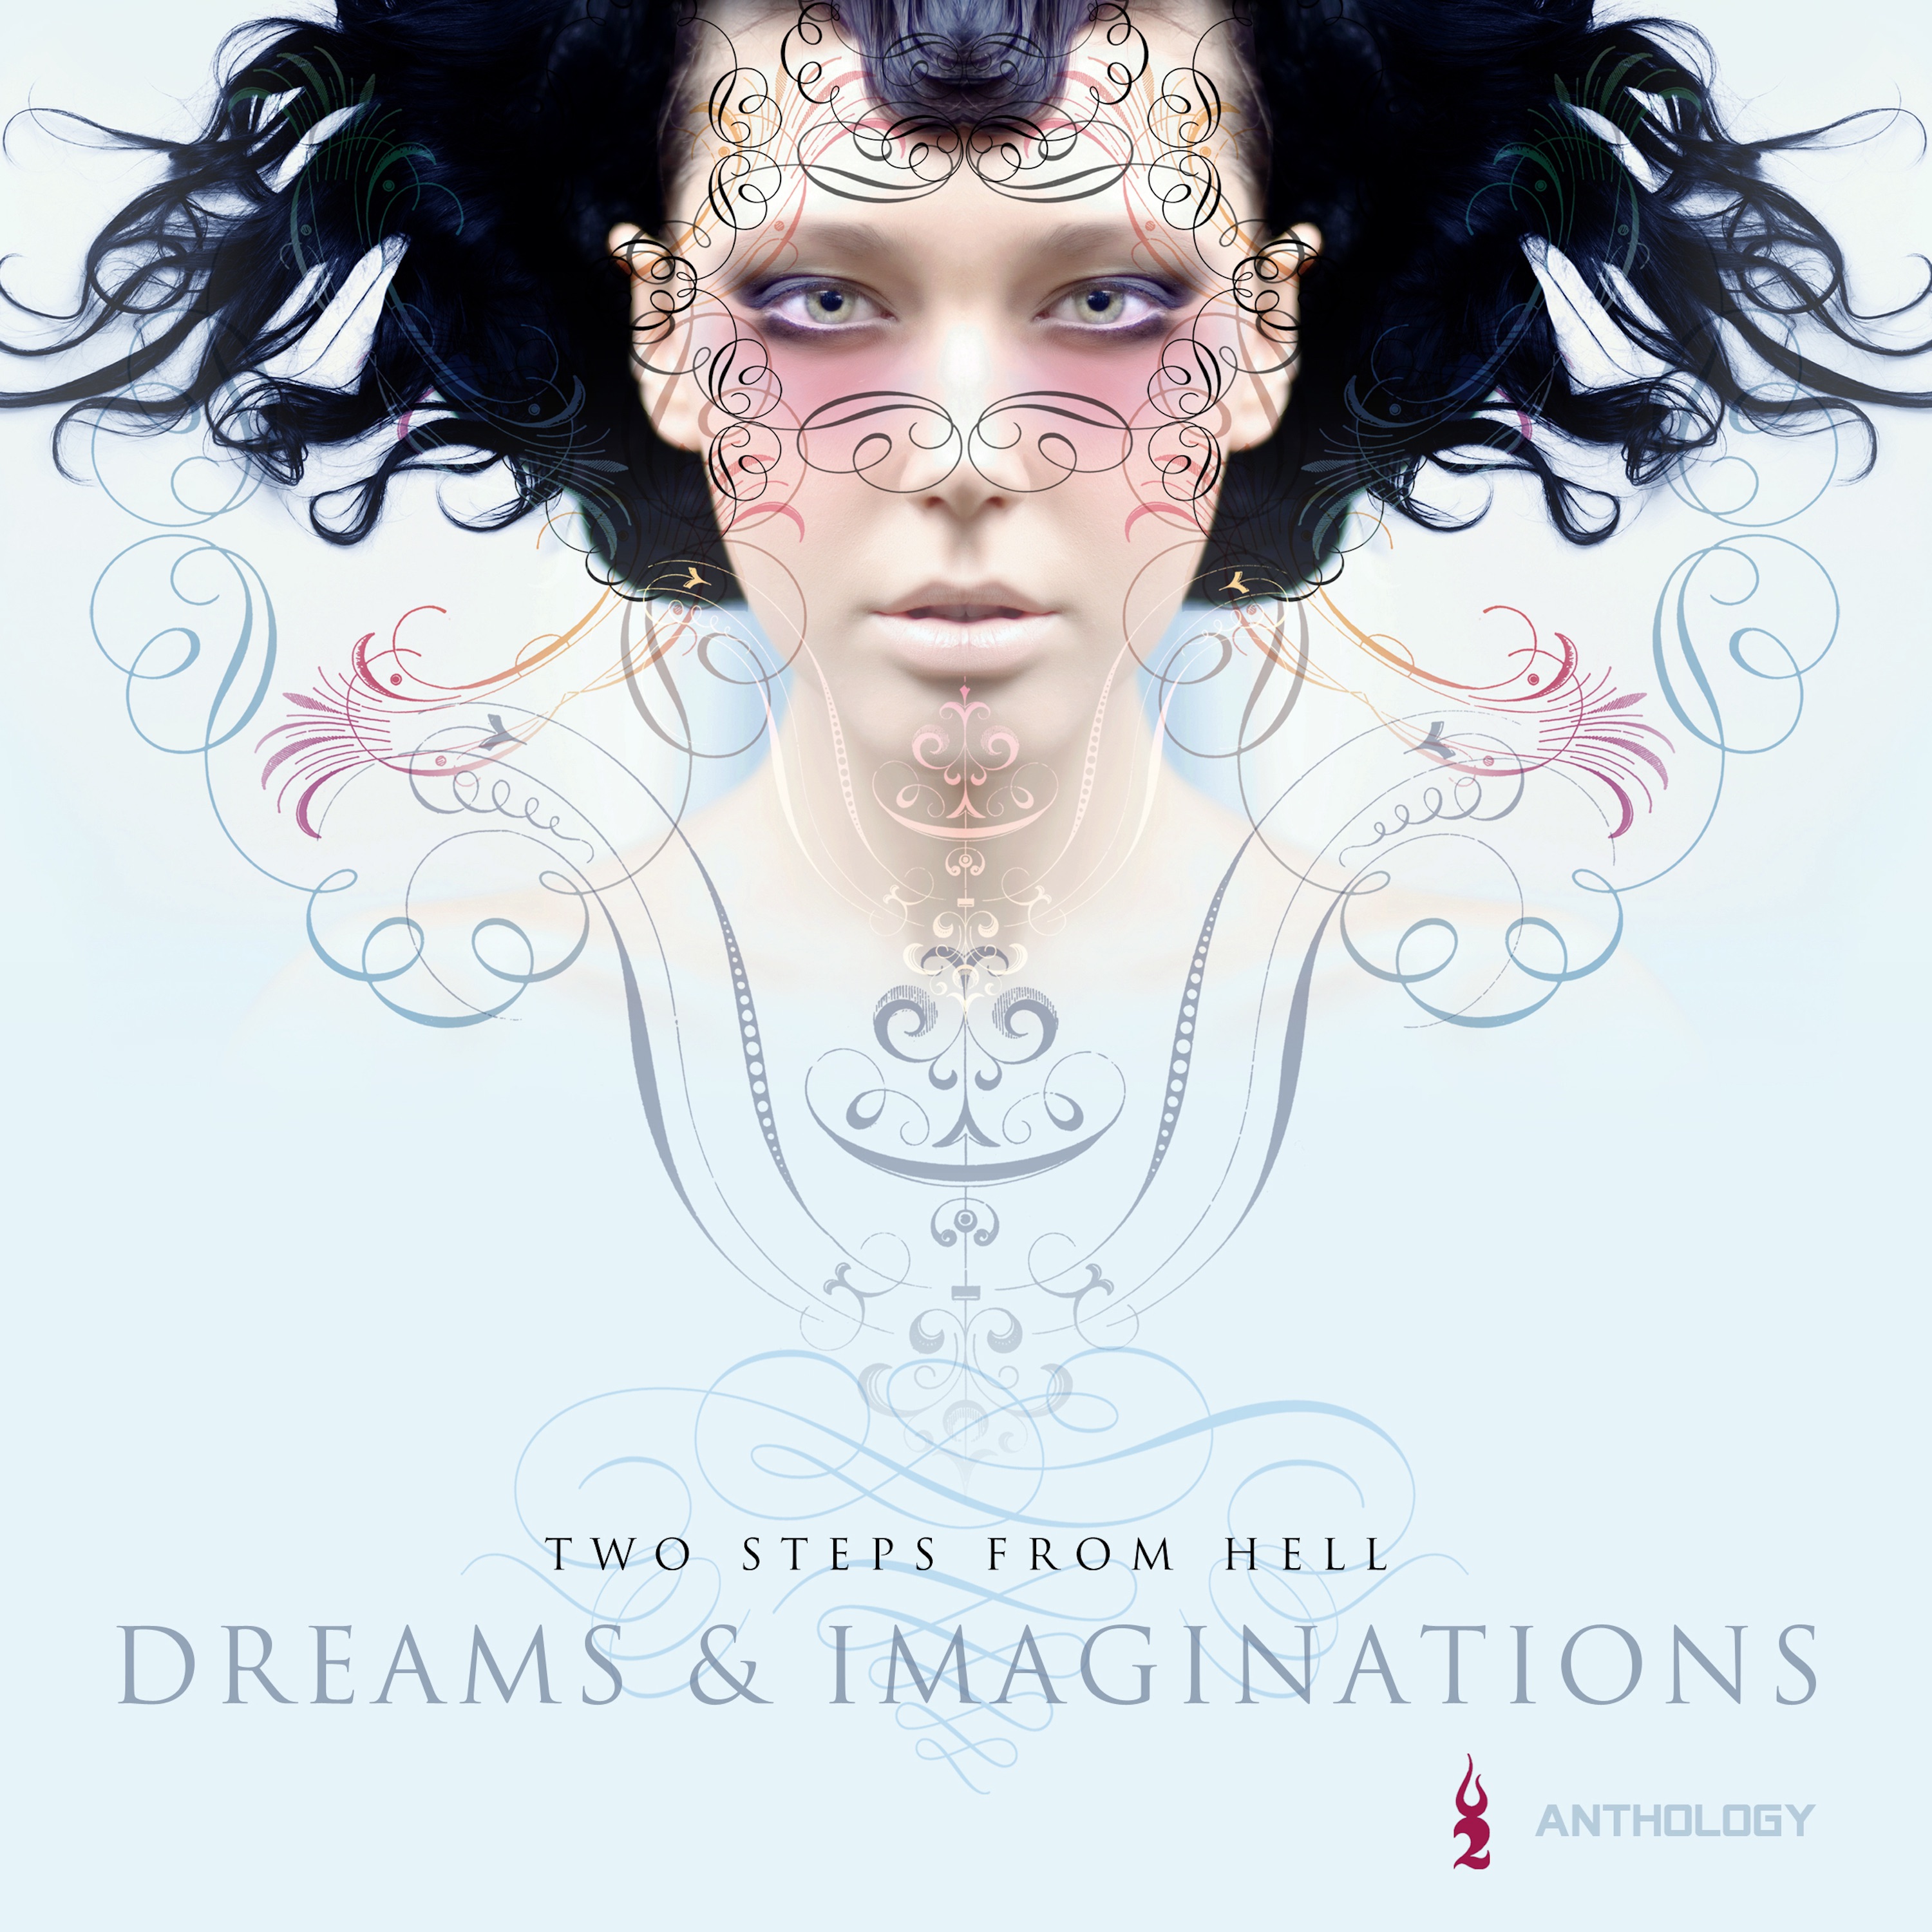 Imaginary 2. Two steps from Hell & Thomas Bergersen. Dreams & imaginations Anthology. Two steps песня. Two steps from Hell - Atlantis.